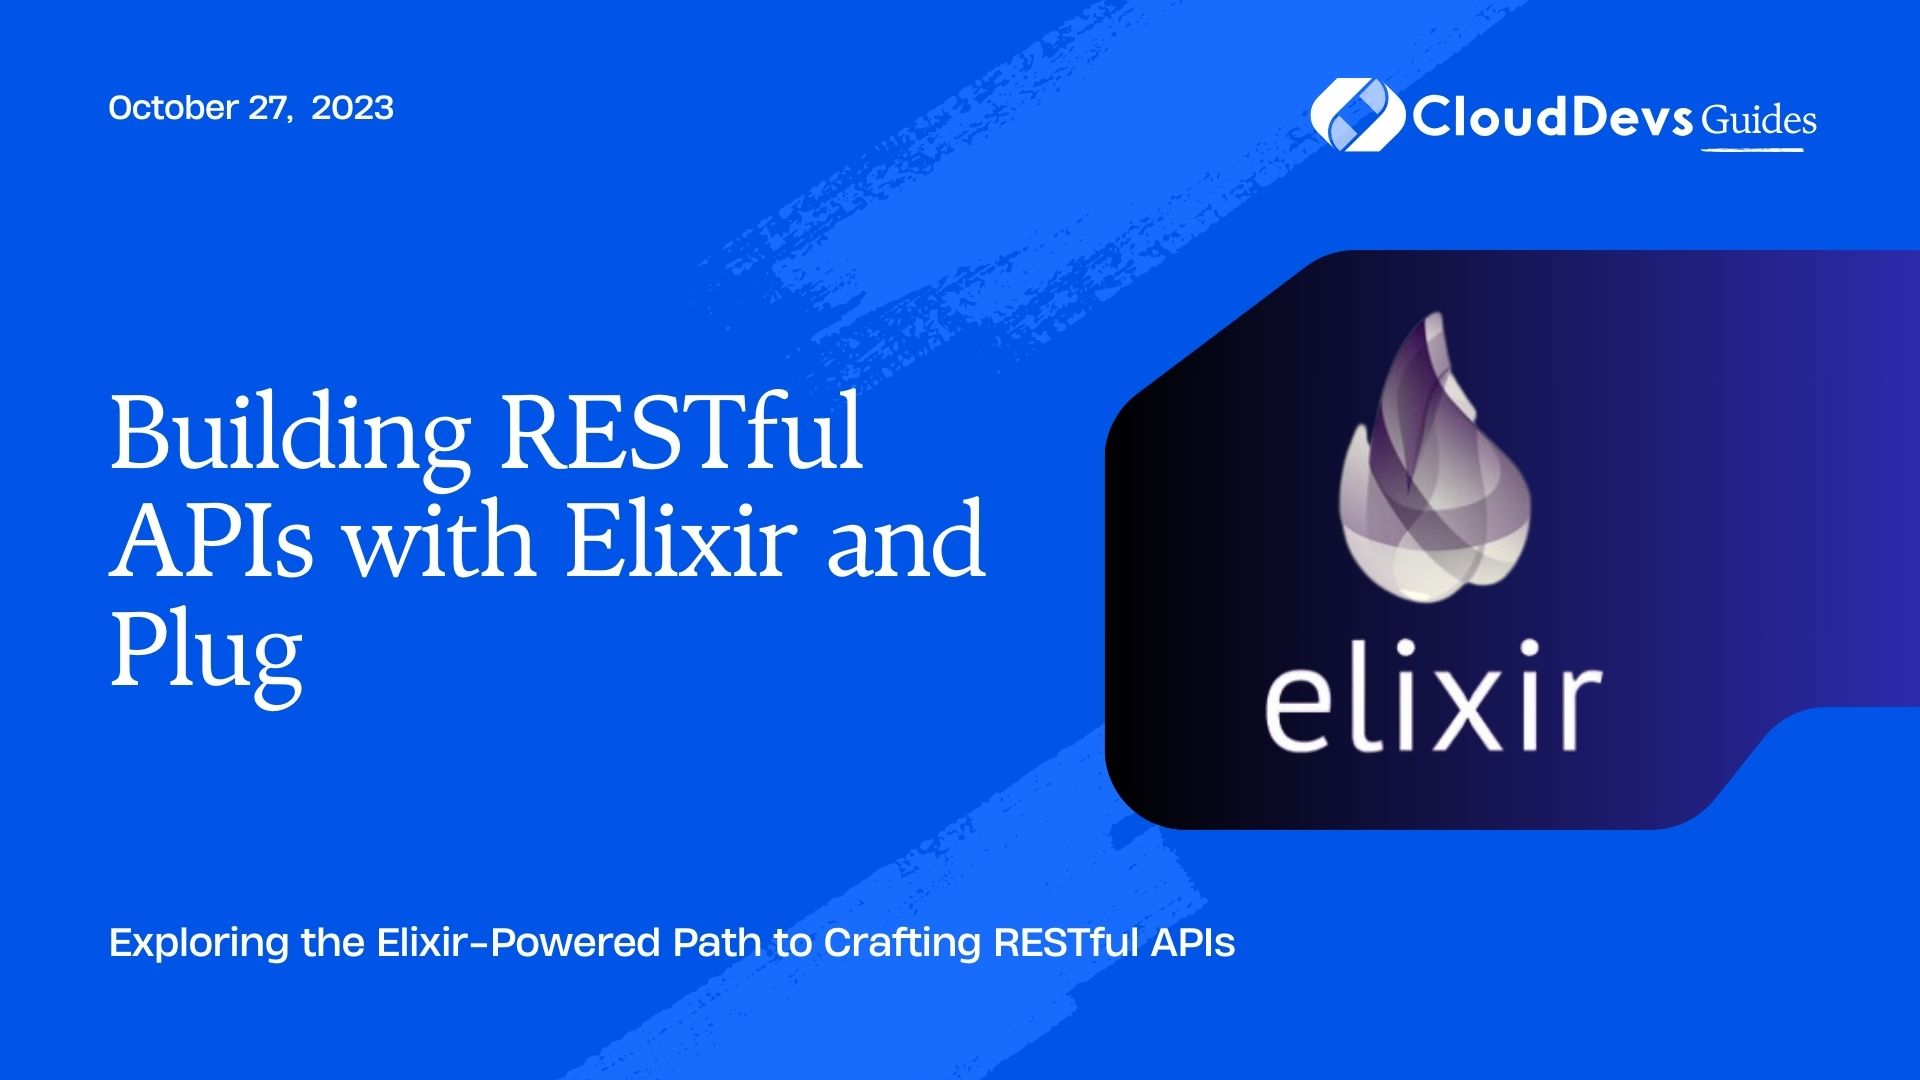 Building RESTful APIs with Elixir and Plug